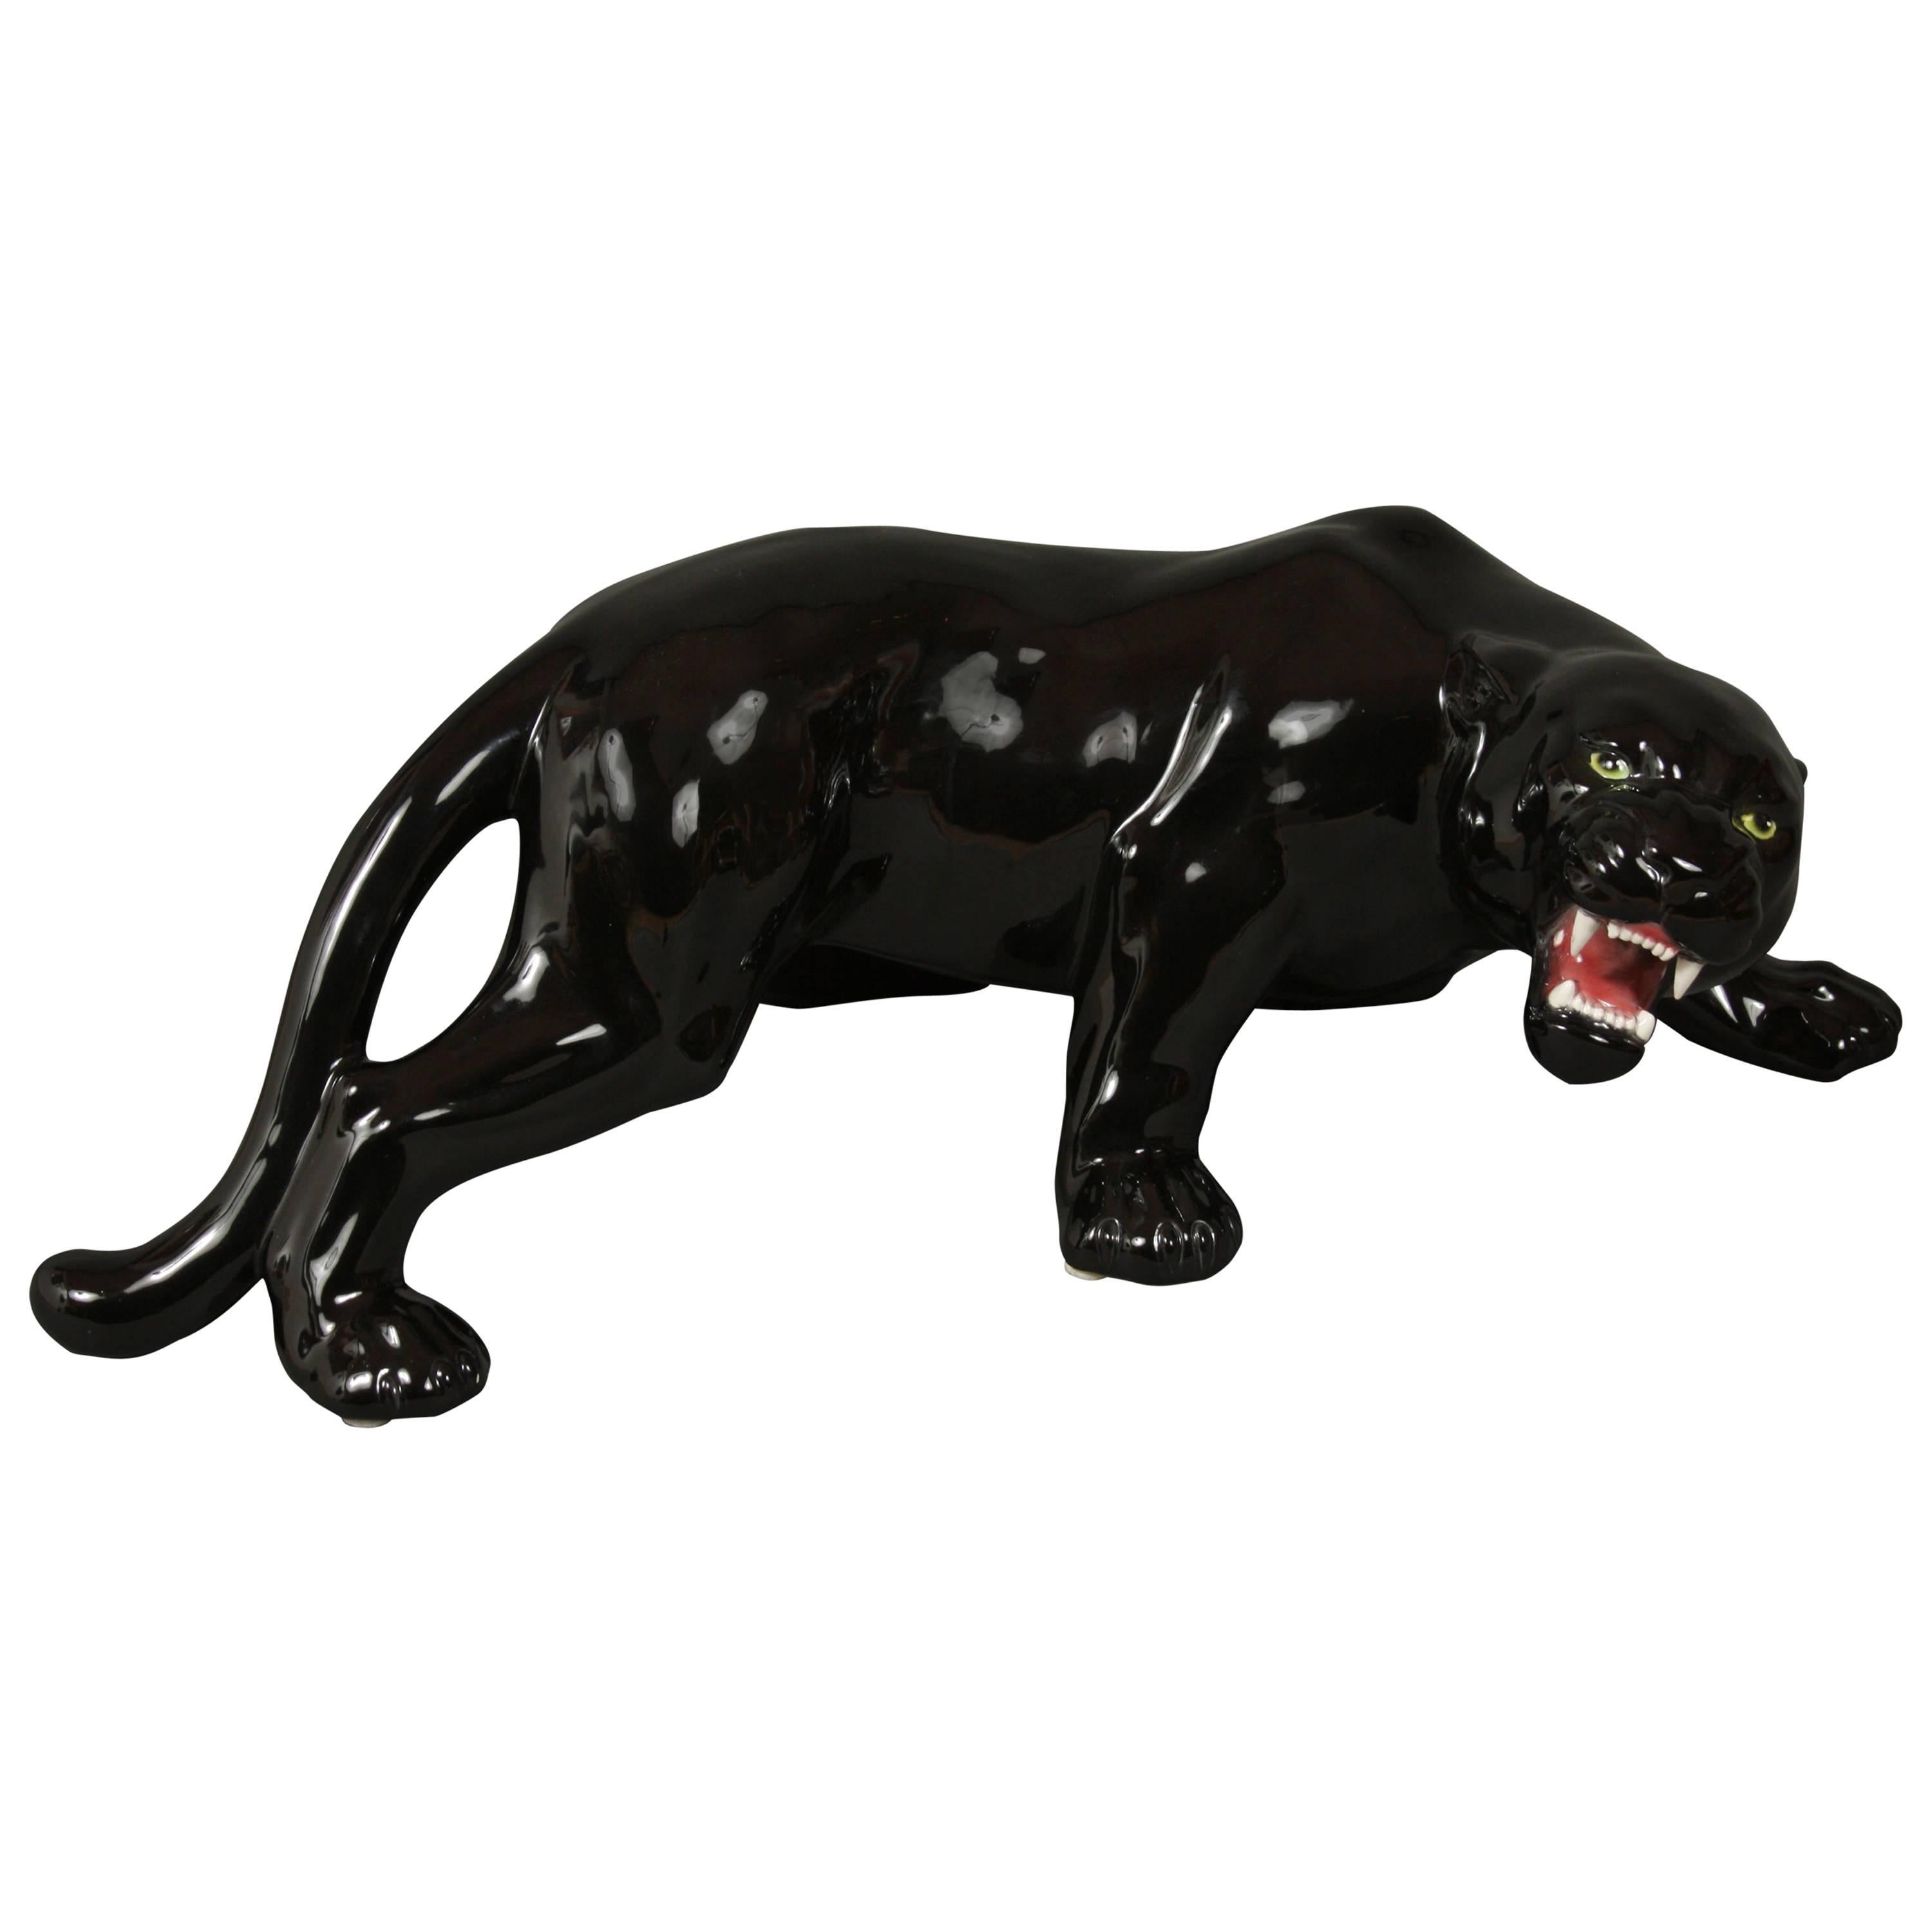 Big Black Panther, Italy, 1980s For Sale